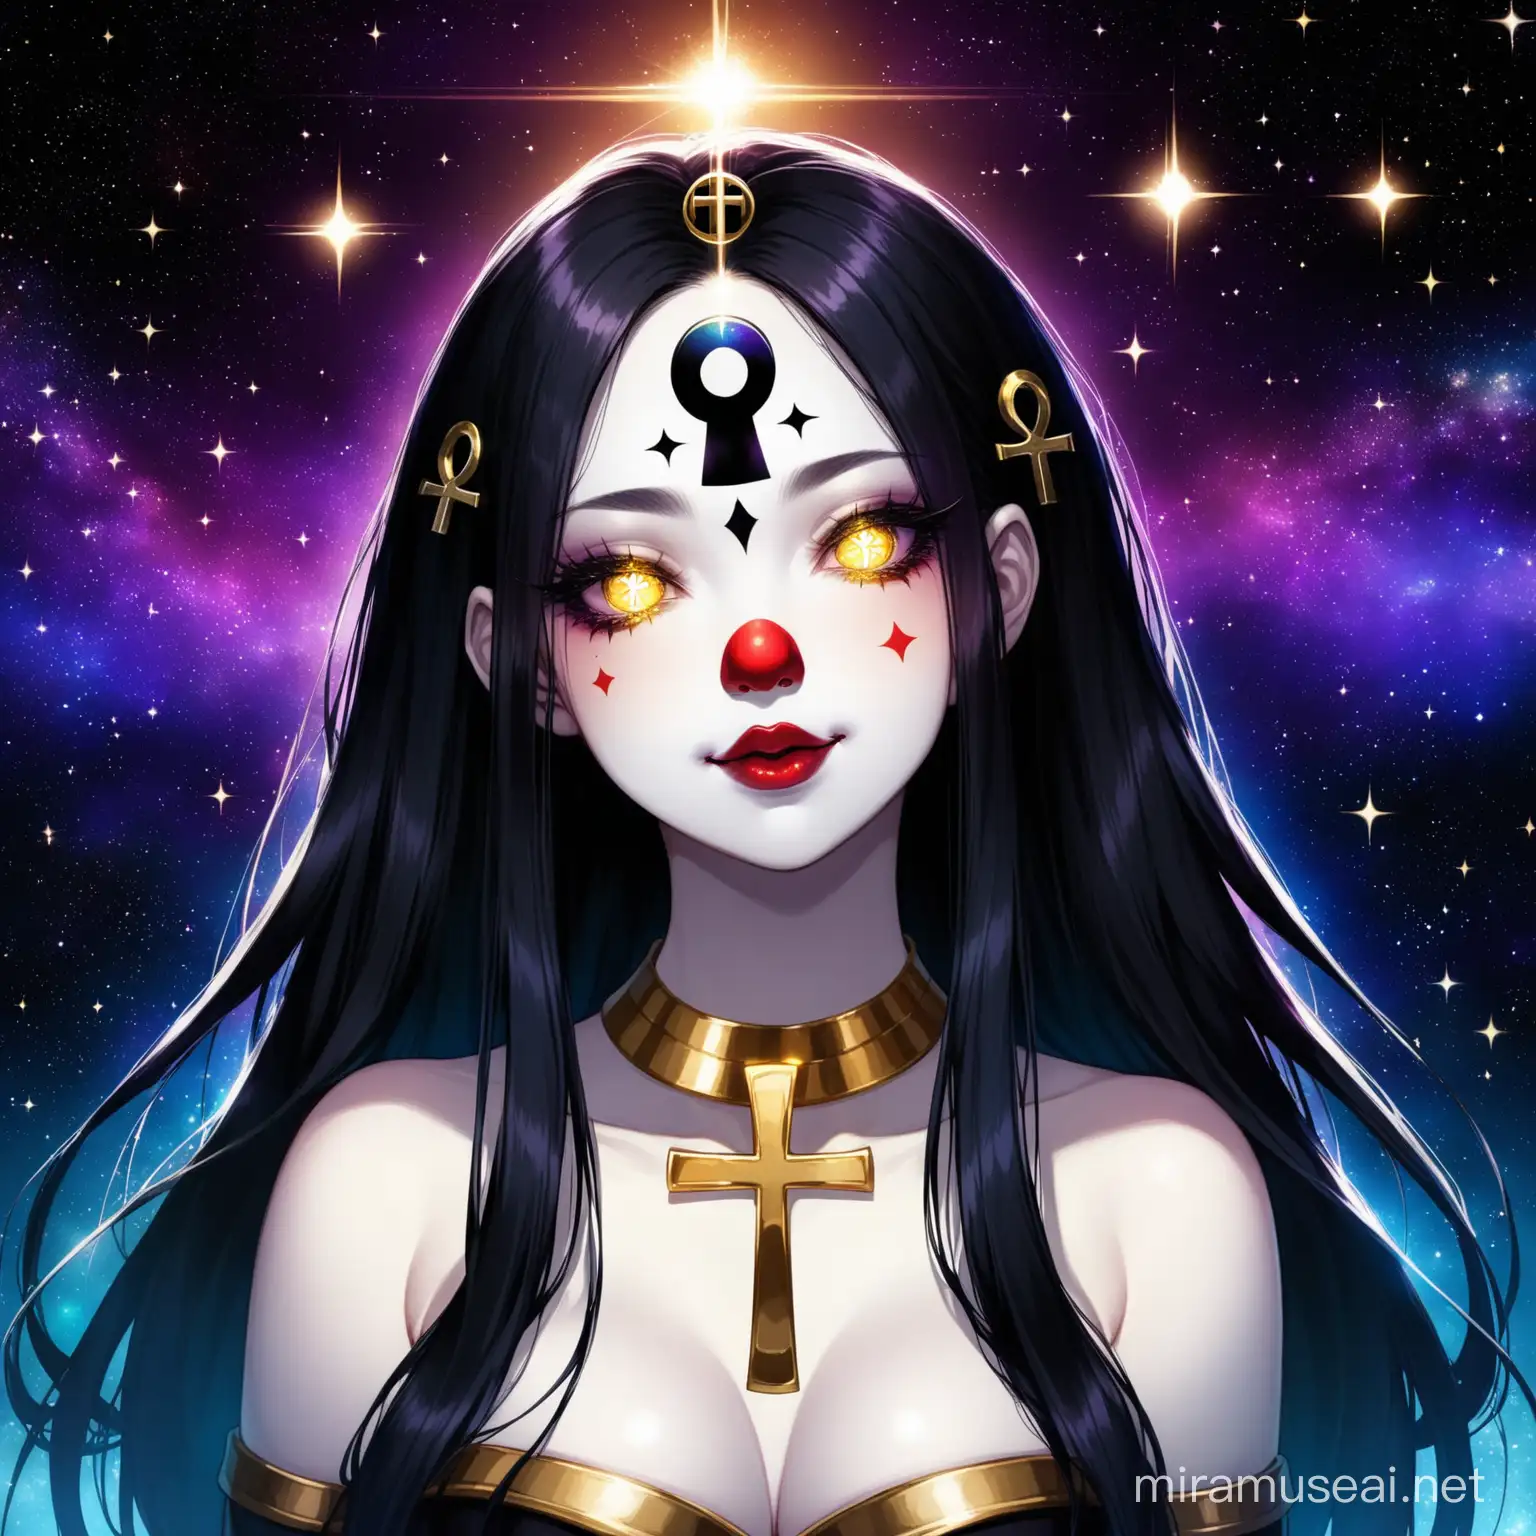 Clown-with Ankh(symbol/white/silver/gold) on forehead(third eye)
appreance- female/headshot/albino/ long hair /beautiful/black hair/jewellery/ beautiful/plump libs/ hot/stunning/
background- stars/noir twilight/space/cool